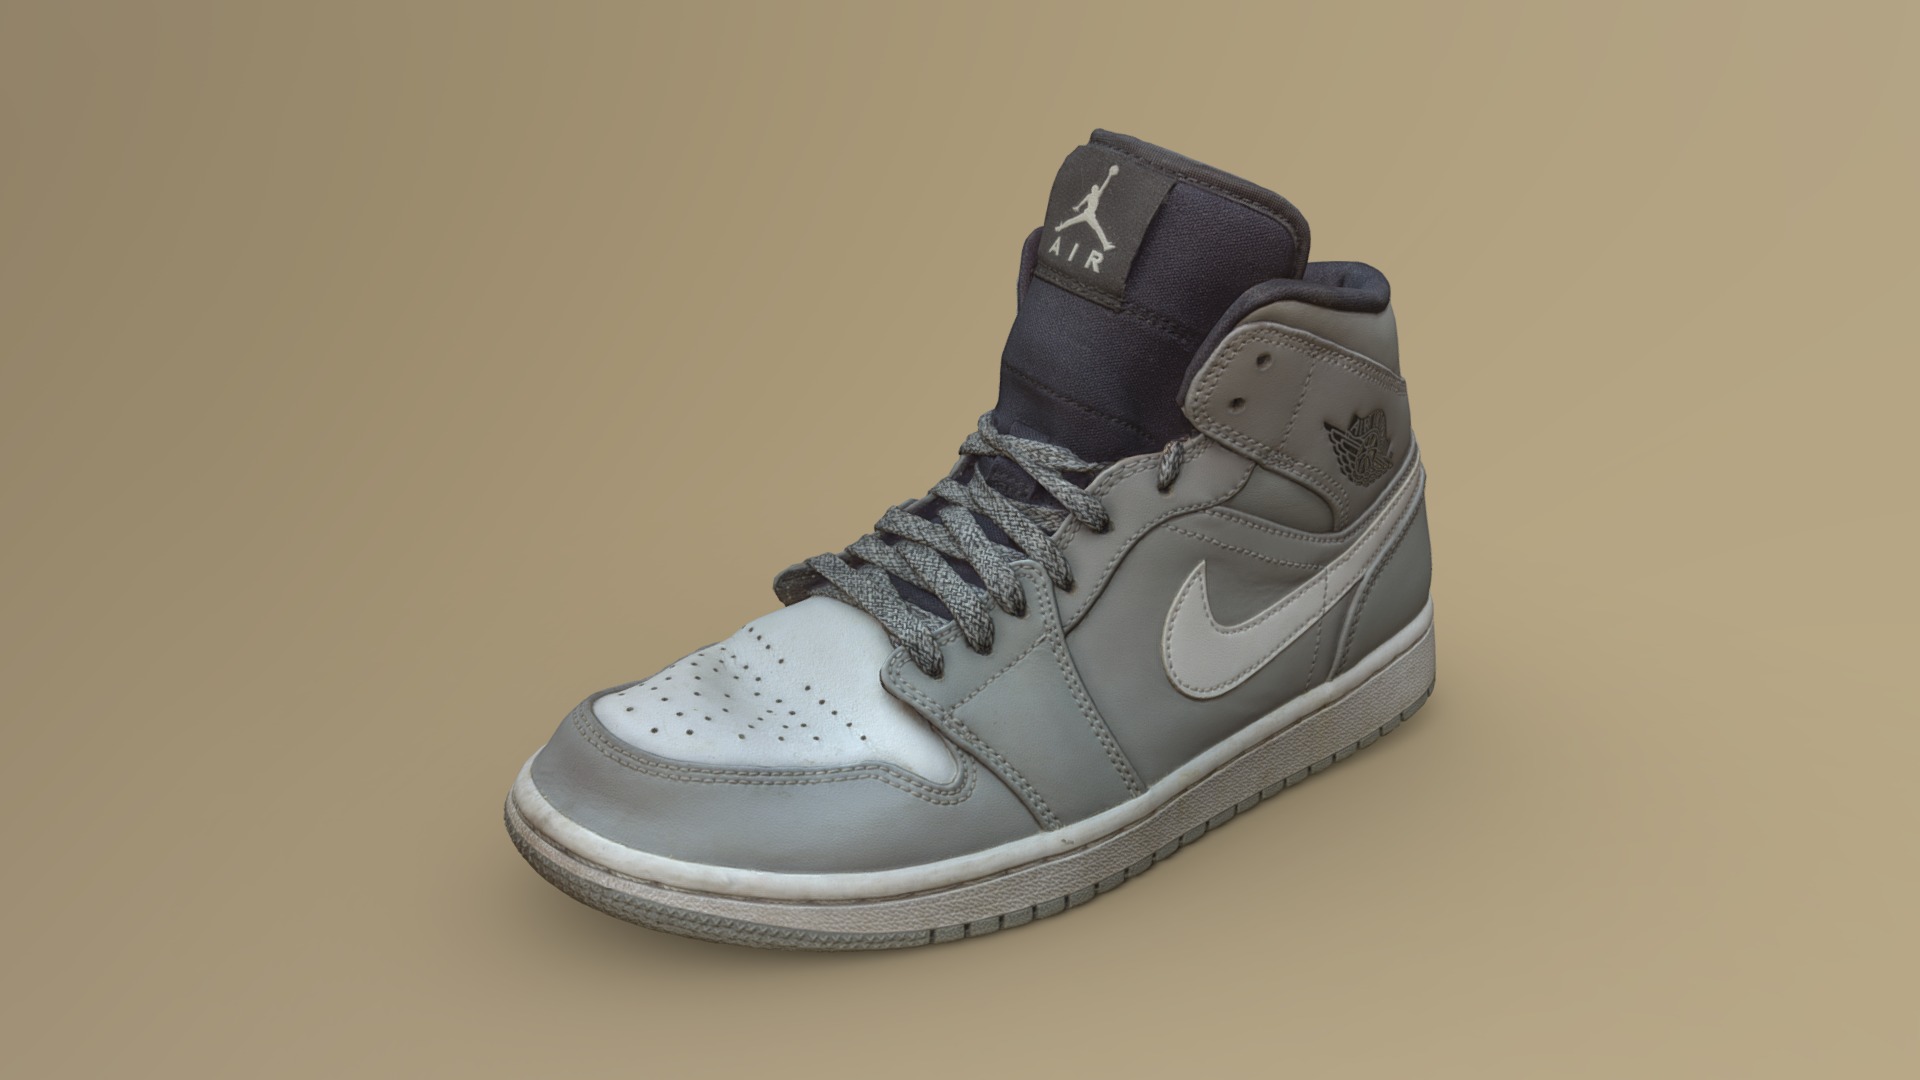 3D model Nike Air Jordan I - This is a 3D model of the Nike Air Jordan I. The 3D model is about a black and white shoe.